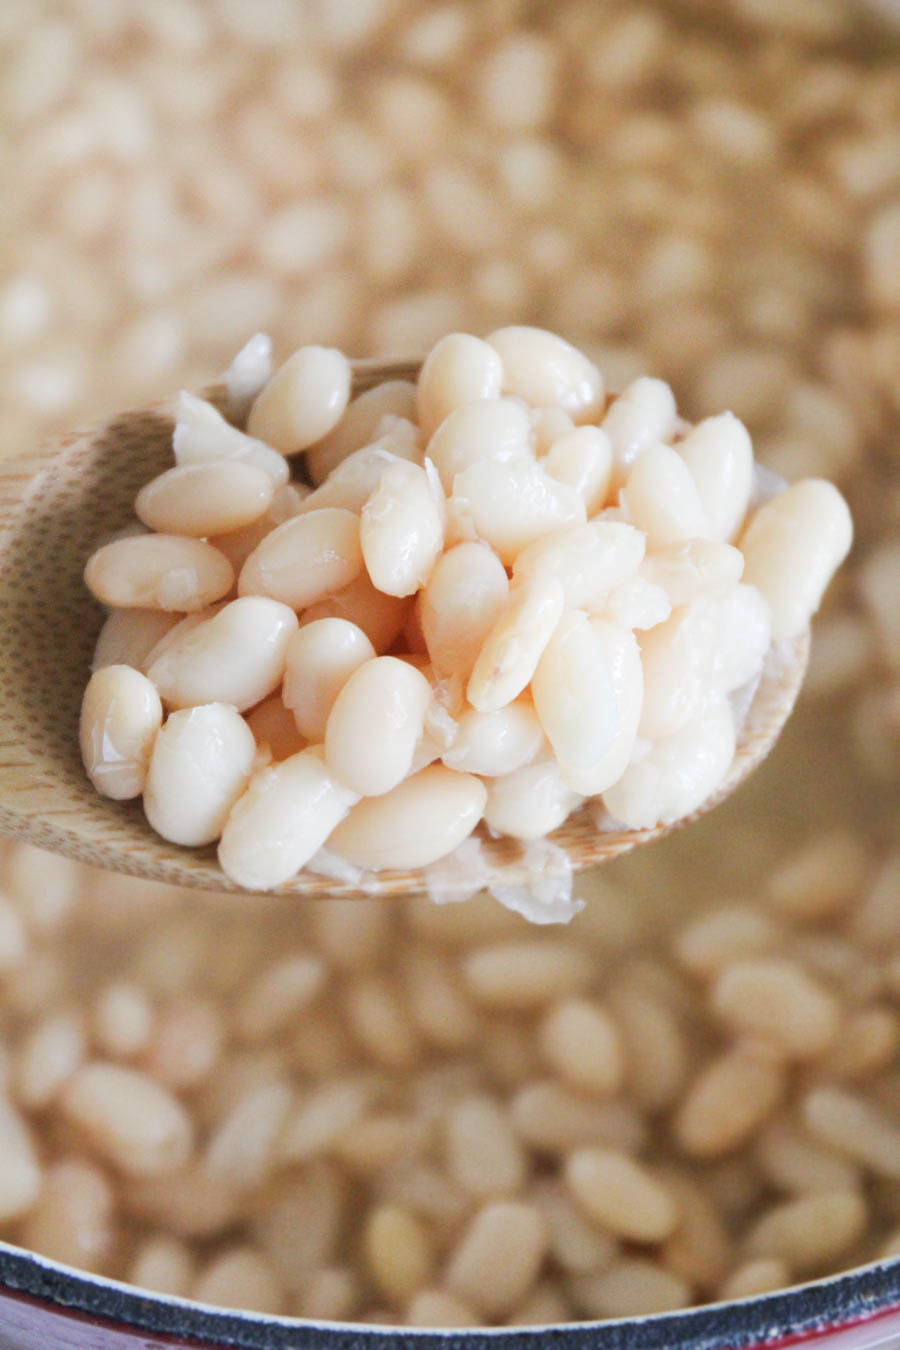 Cooking with dried beans is simple and easy, and a great way to save money in the kitchen!